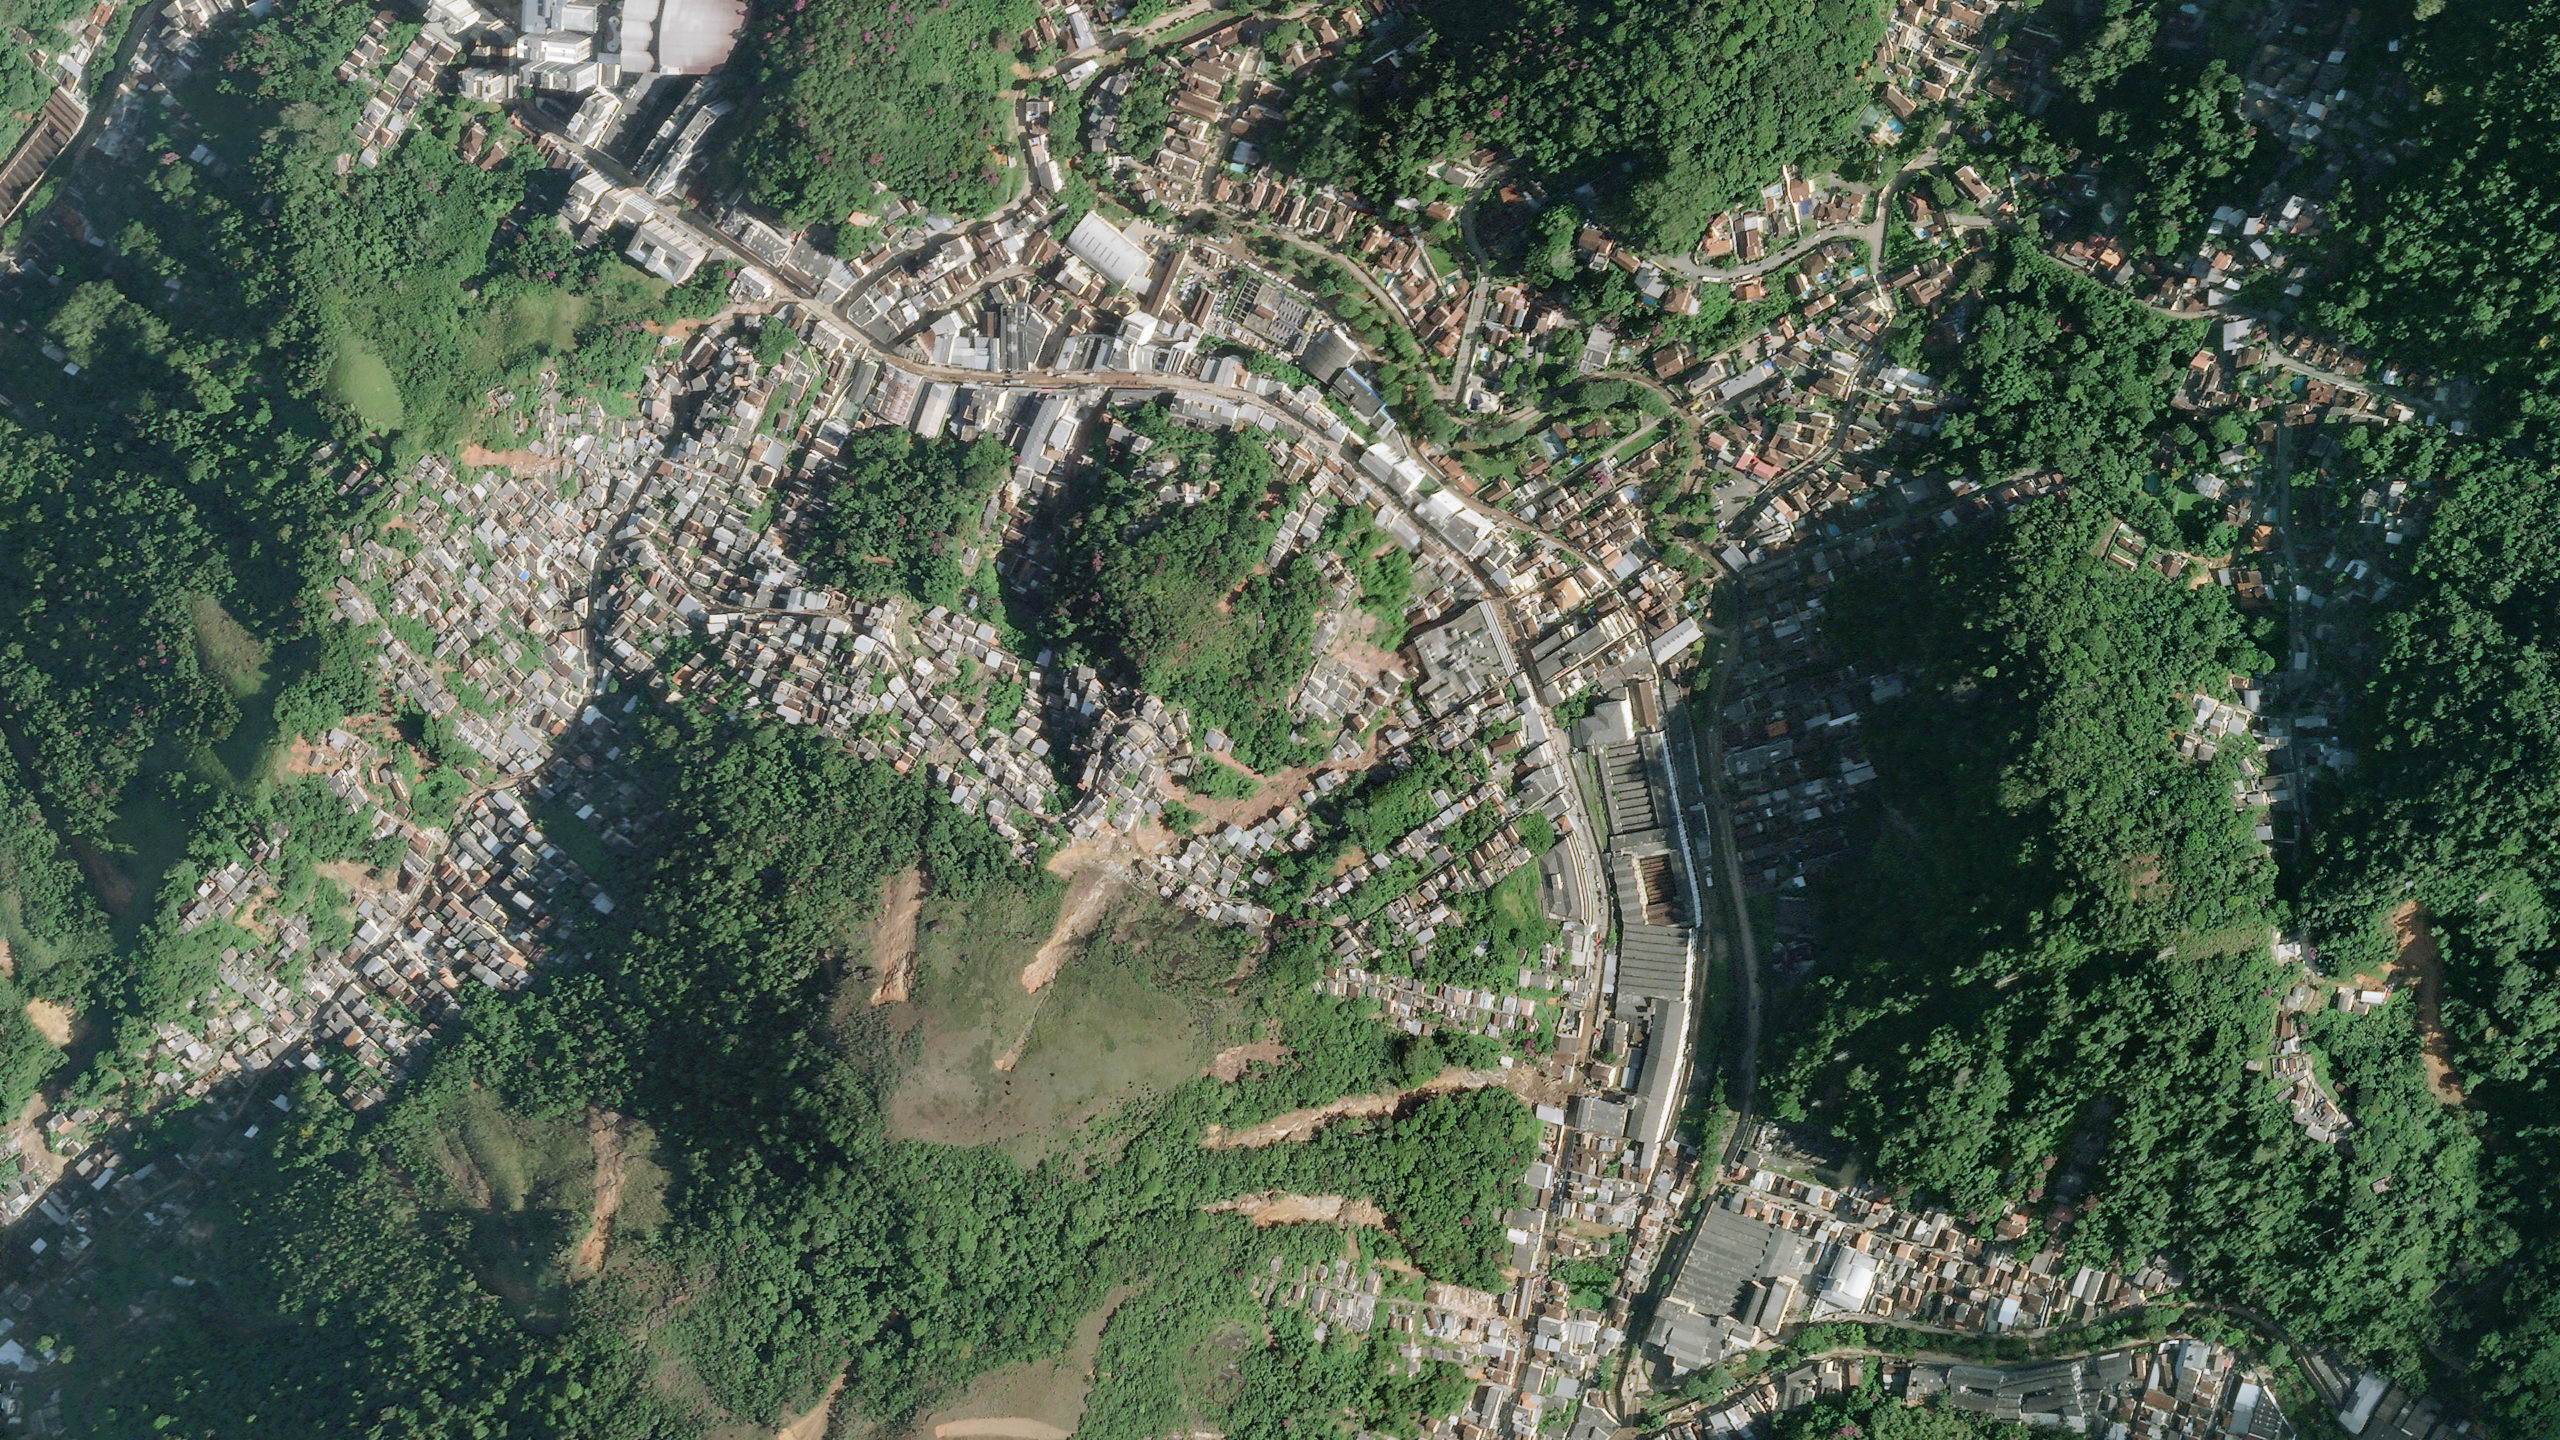 High resolution satellite images of the landslides in the north of the city of Petrópolis in Brazil.